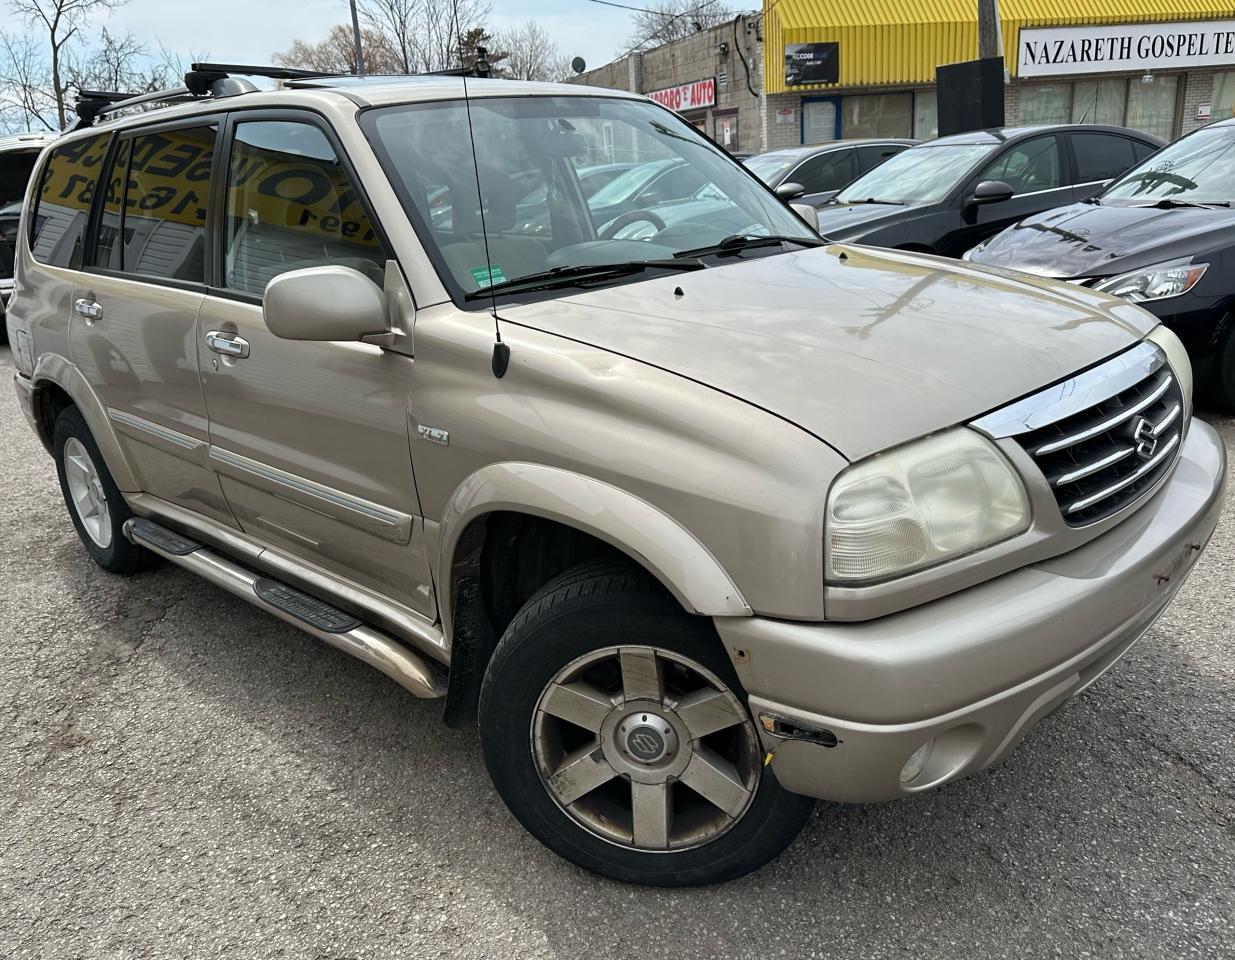 Used 2003 Suzuki XL-7 JX/4WD/7PASS/ROOF/P.GROUB/ALLOYS for Sale in